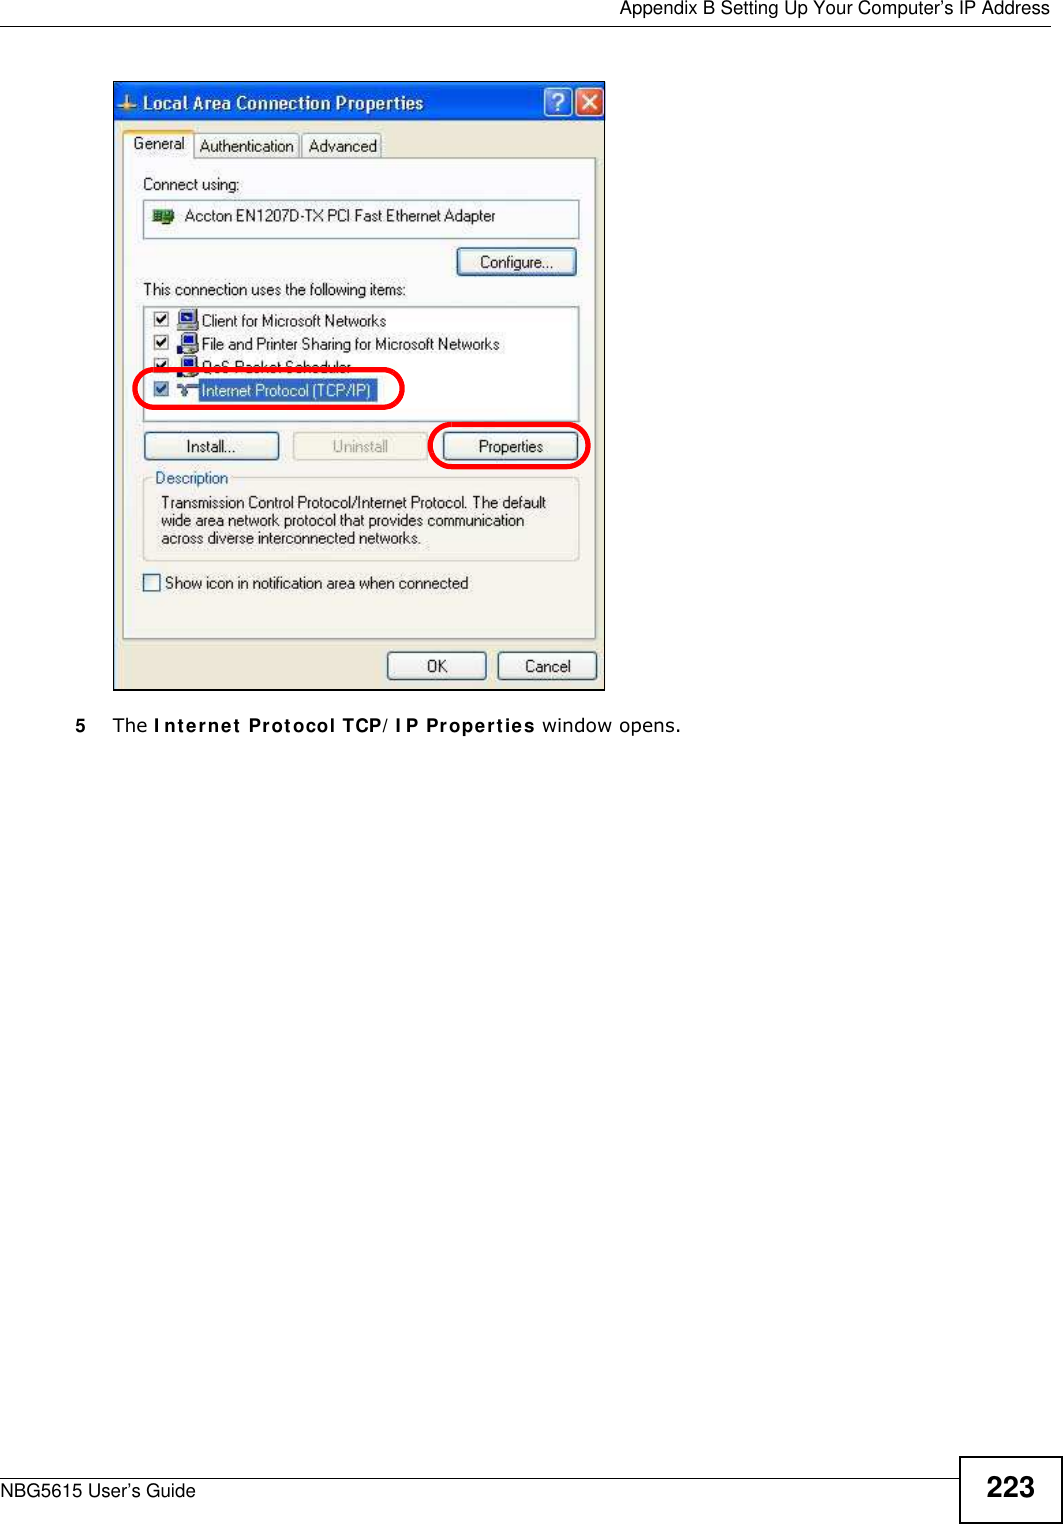  Appendix B Setting Up Your Computer’s IP AddressNBG5615 User’s Guide 2235The I nternet Protocol TCP/ I P Properties window opens.